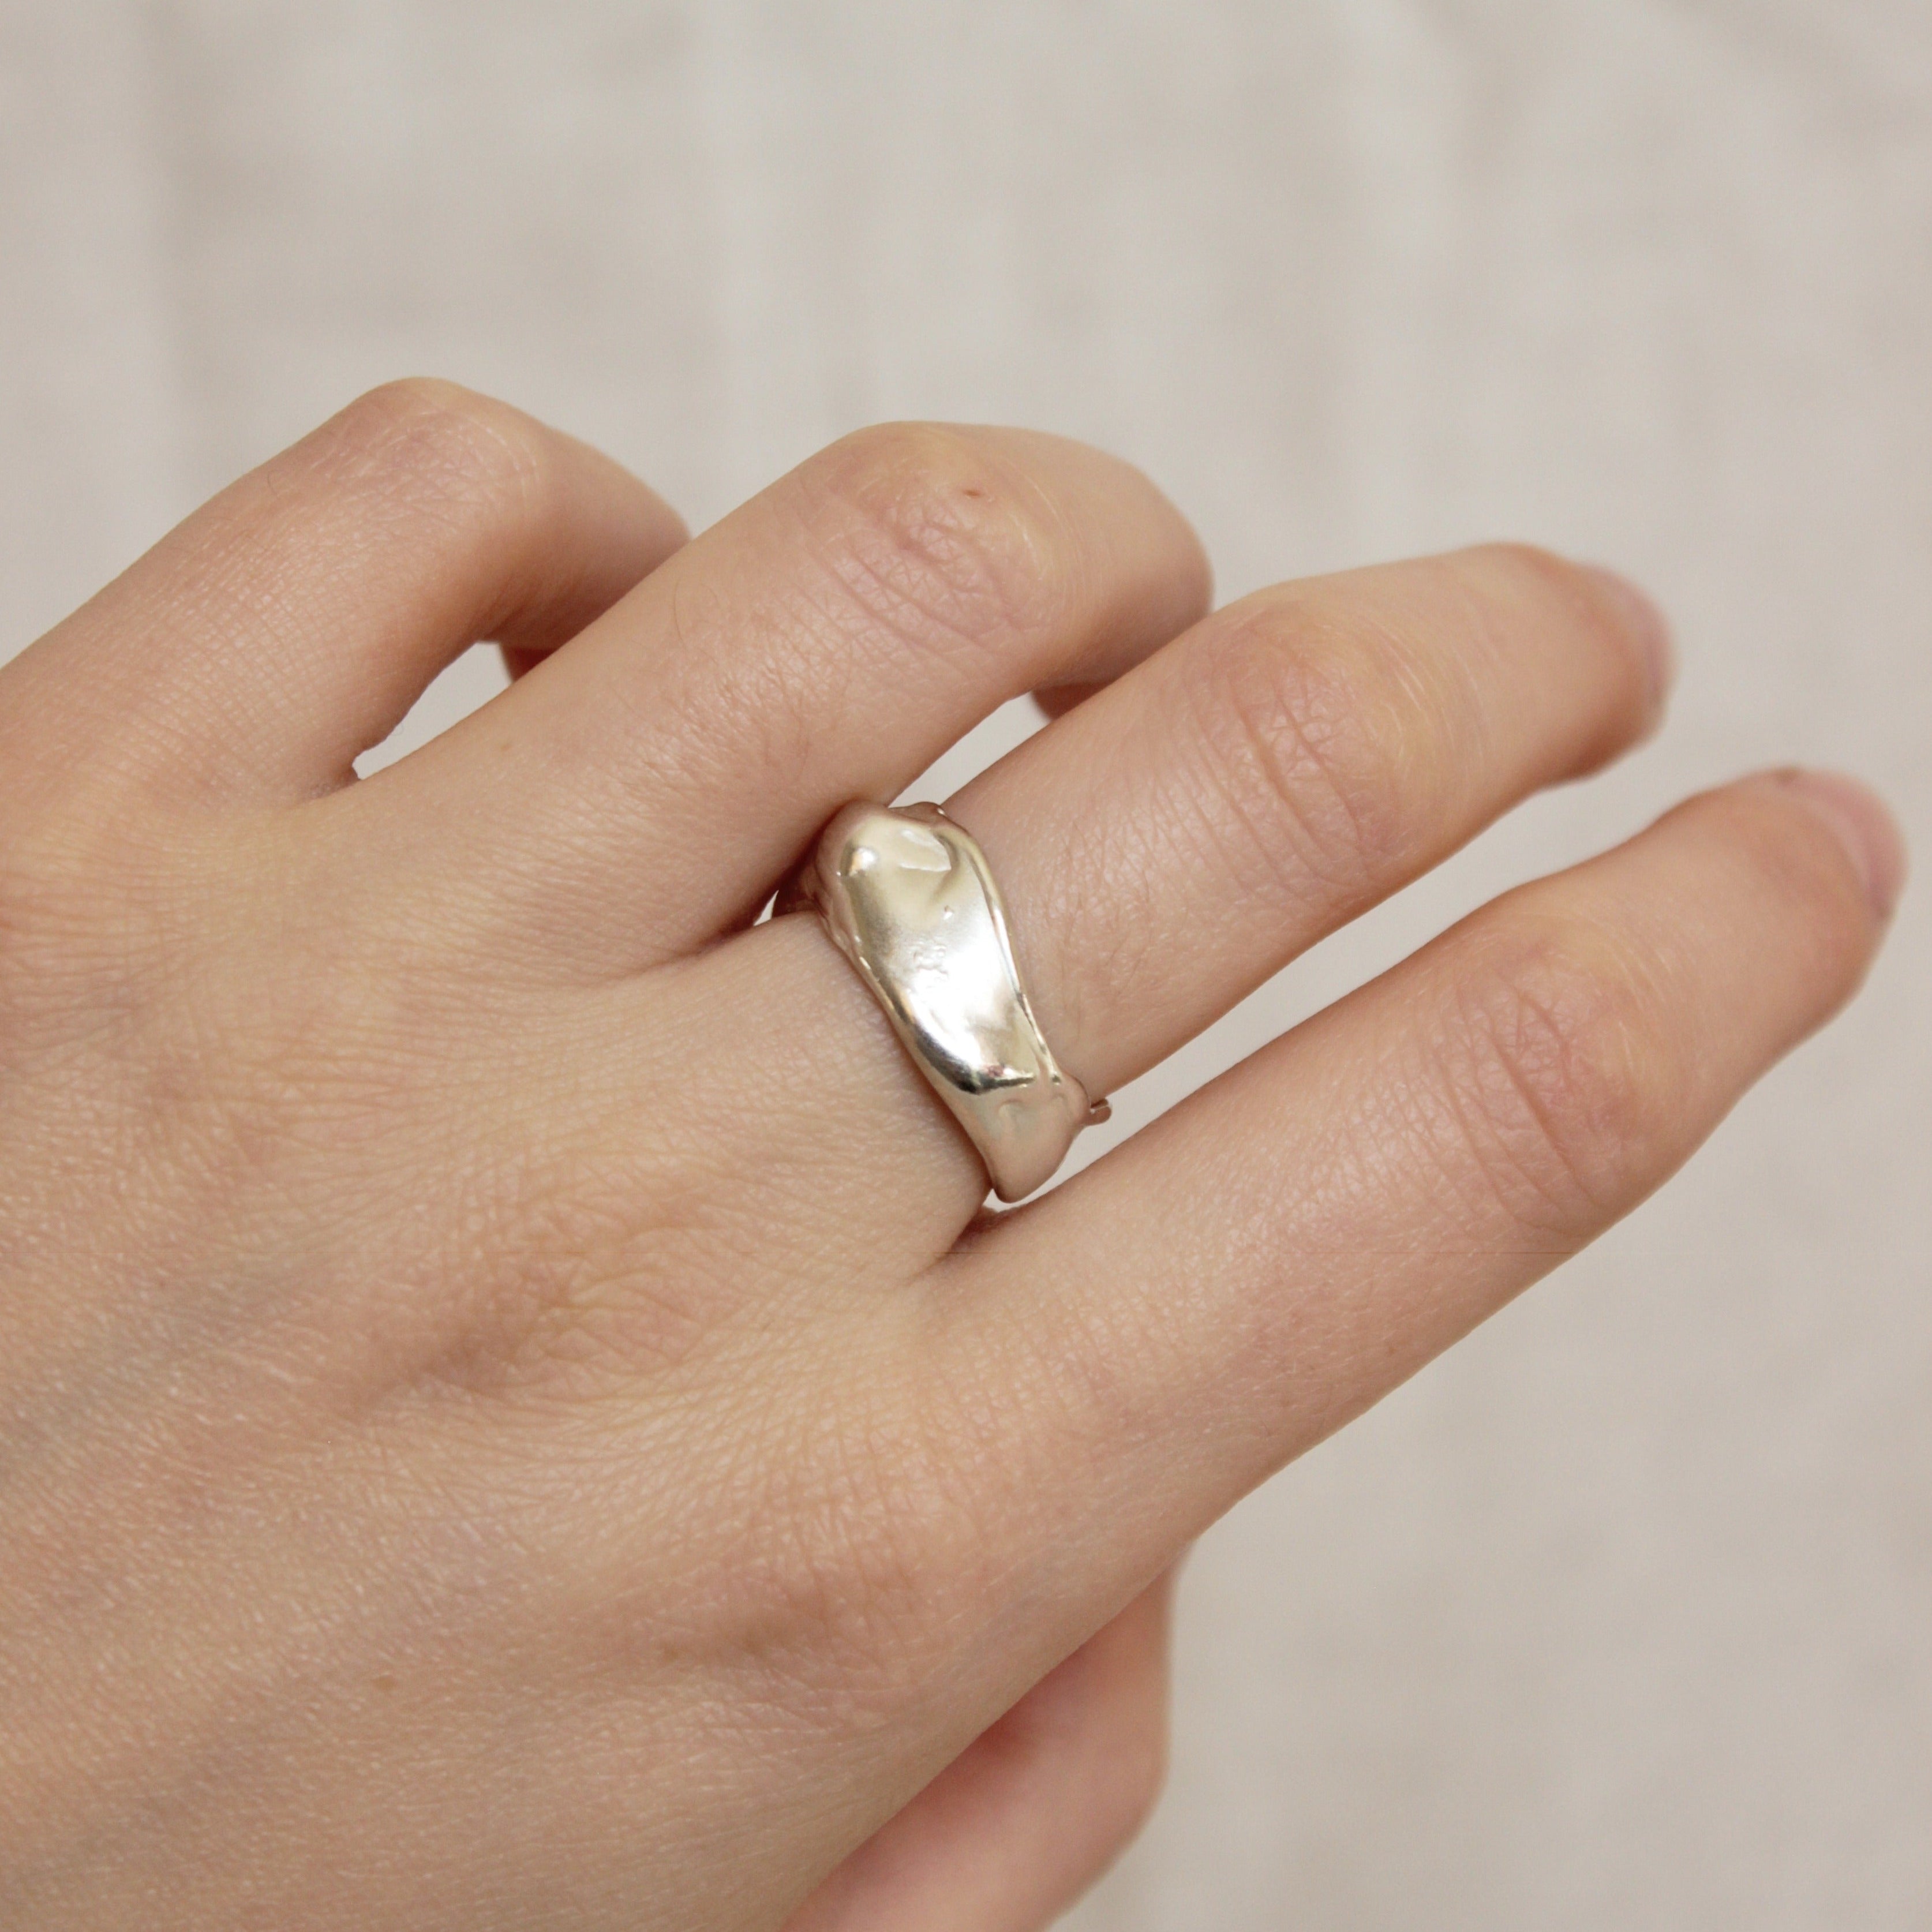 The Esme ring features a gorgeous organic texture inspired by the best selling Molten Collection. Esme means 